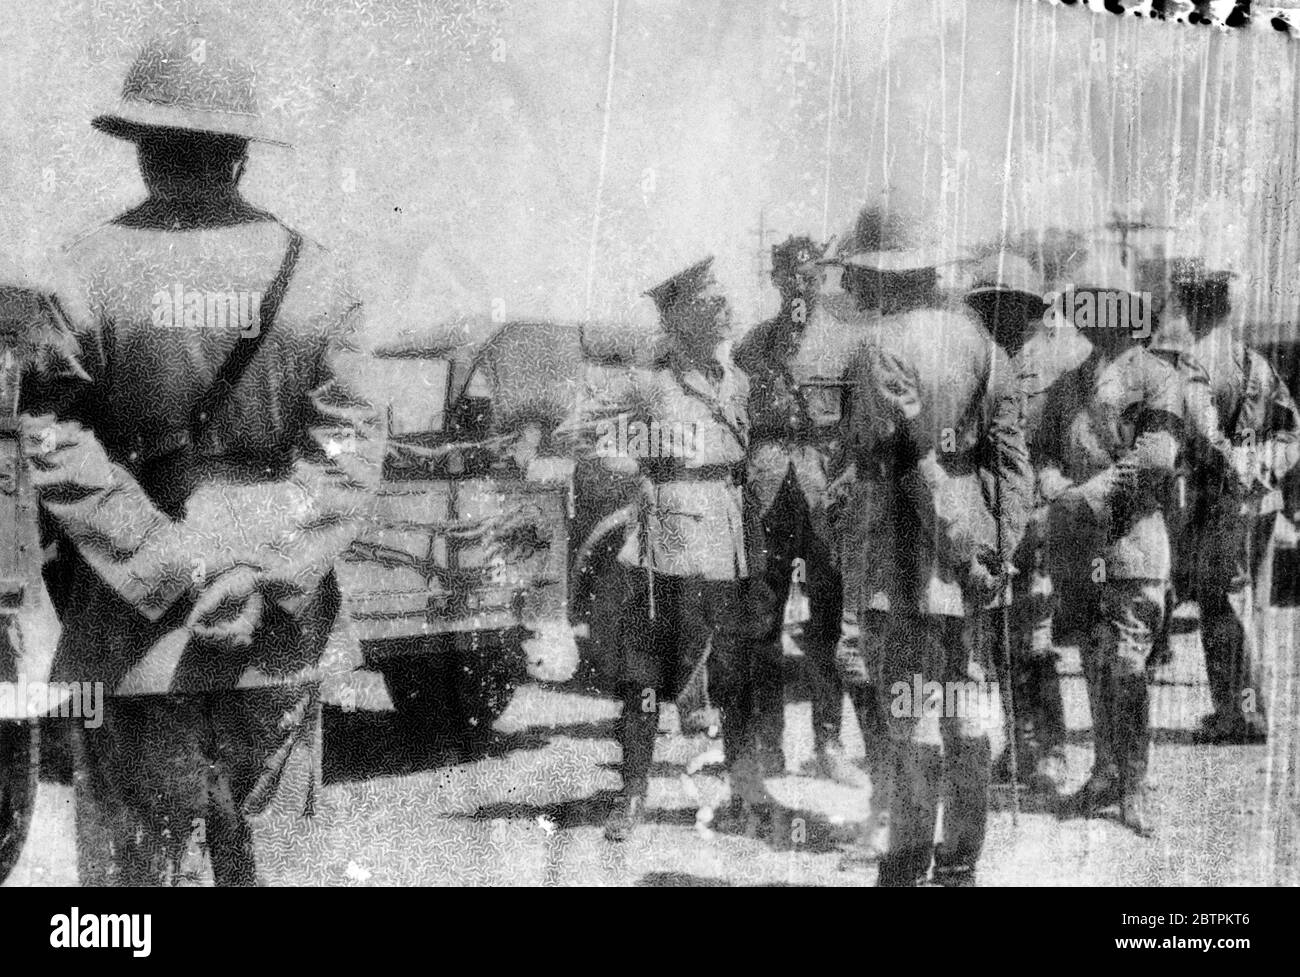 British High Commissioner Inspects Reinforcements In Palestine . Sir Arthur Wauchope , the High Commissioner for Palestine , inspecting the 8th Hussars Regiment in Talaverra Barracks , near Jerusalem after their arrival from Egypt to reinforce the troops which are combating the Arab reign of terror . The High Commissioner spoke to the Hussars and advised them on their duties in the more dangerous parts of the country . Photo shows : Sir Arthur Wauchope , the High Commissioner ( peaked cap ) talking with officers at the inspection . 7 Jul 1936 Stock Photo